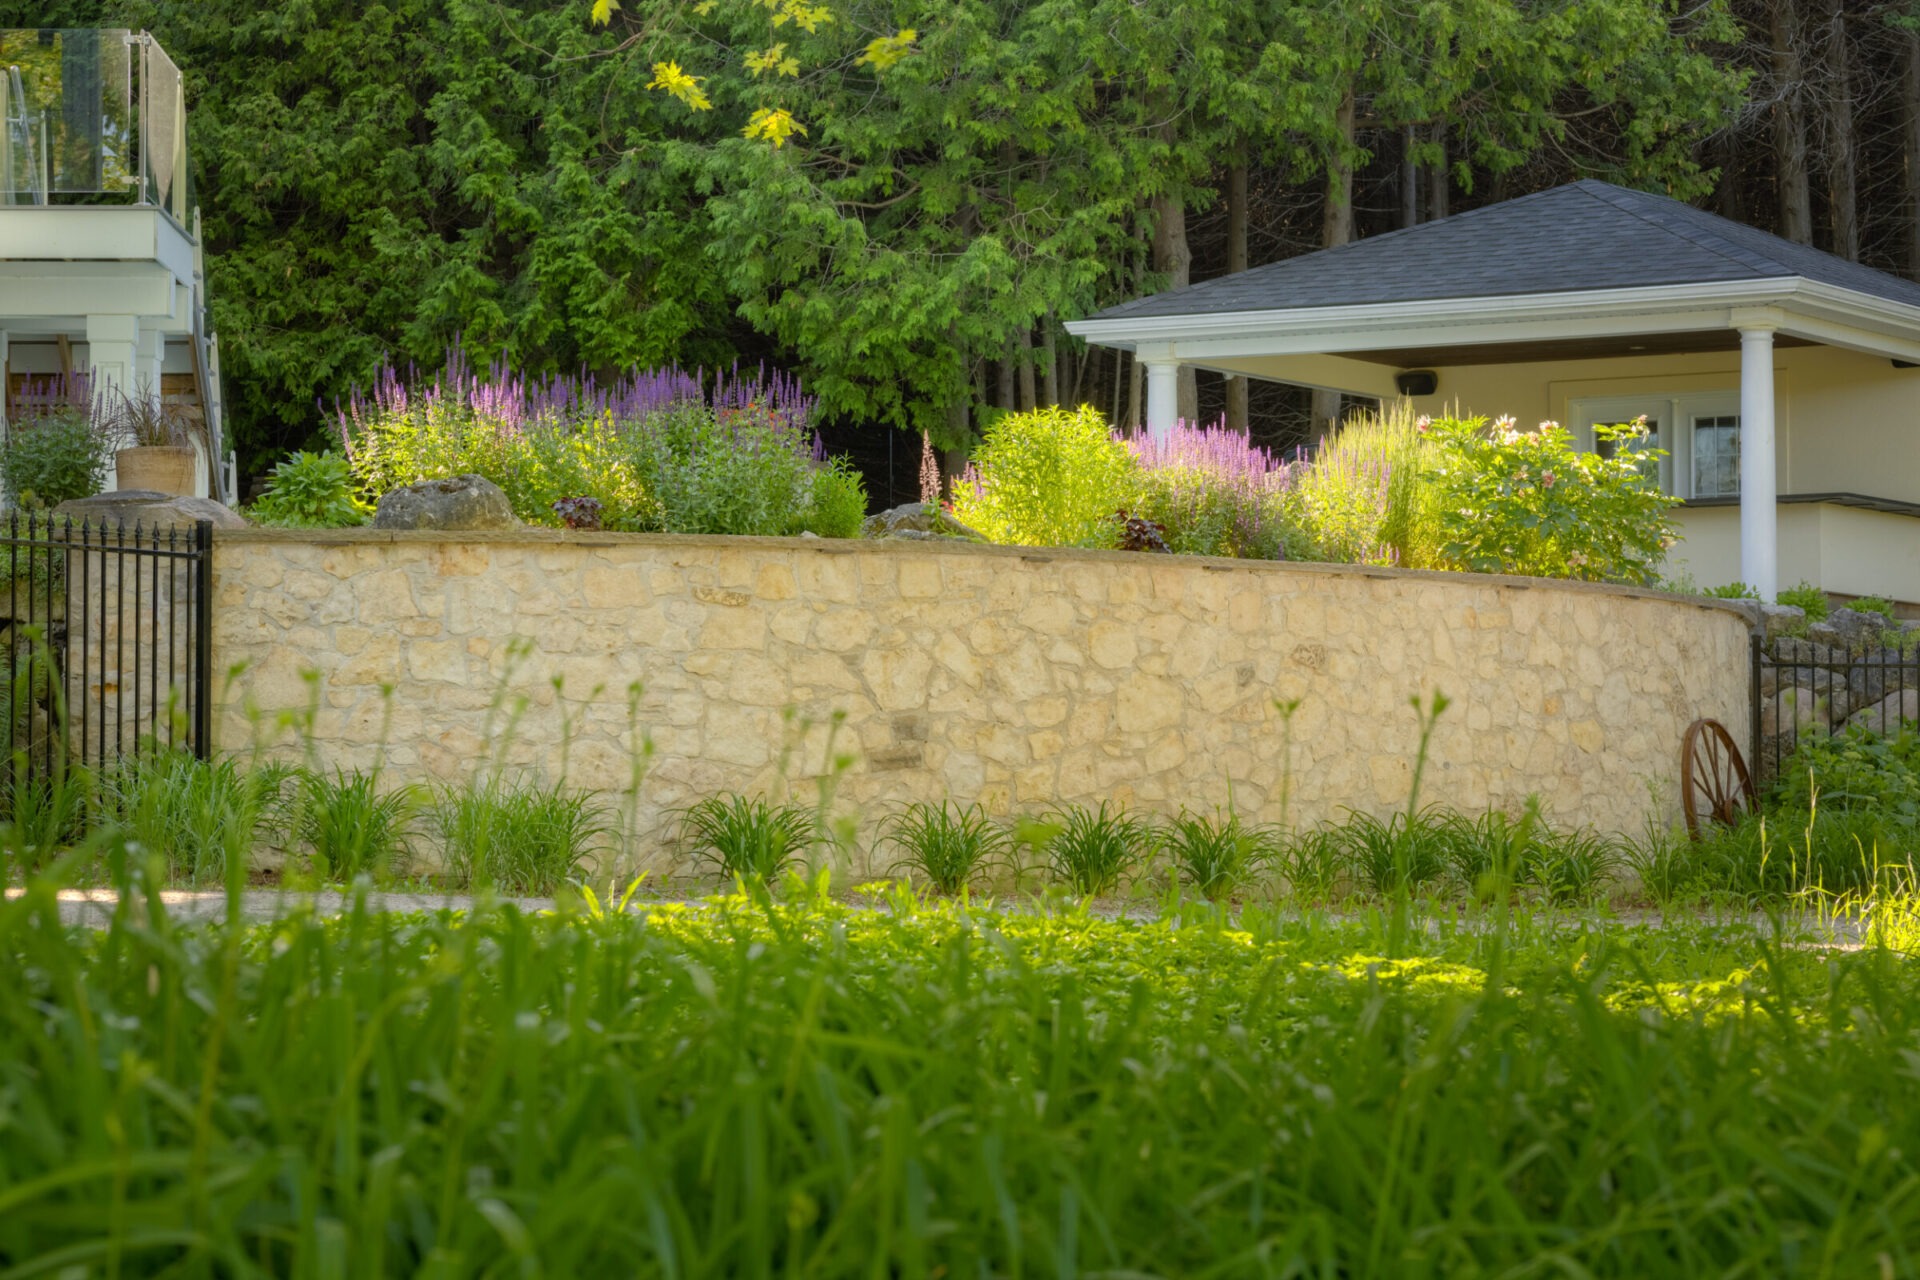 A stone retaining wall adorned with purple and green plants separates a lush lawn from a house partially obscured by trees and shrubbery.